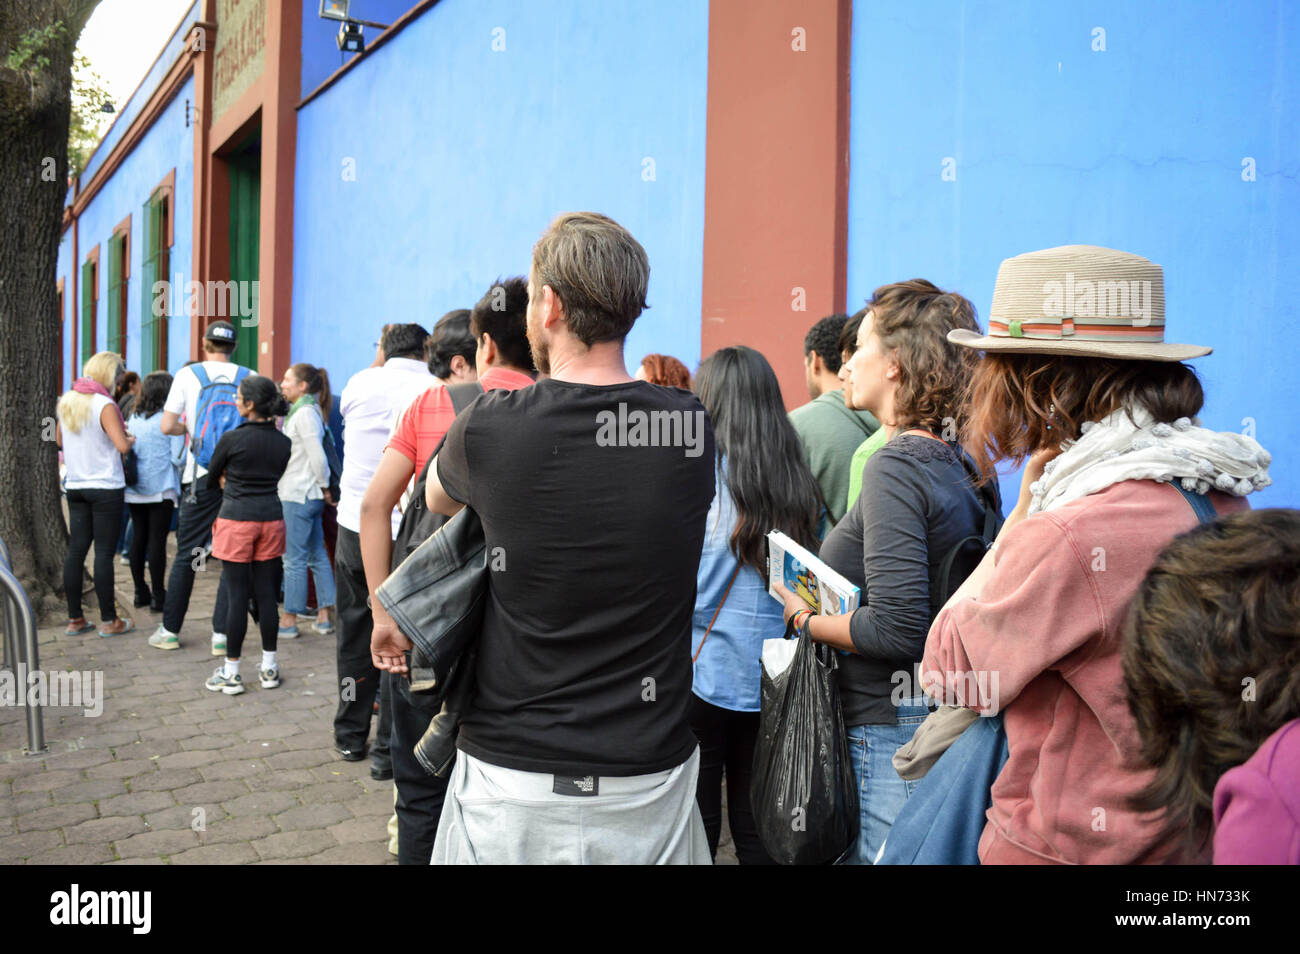 Mexico City, Mexico - November 2, 2014: Tourists wait in long line to get to the famous Frida Kalho Museum in Mexico City, Shallow DOF Stock Photo